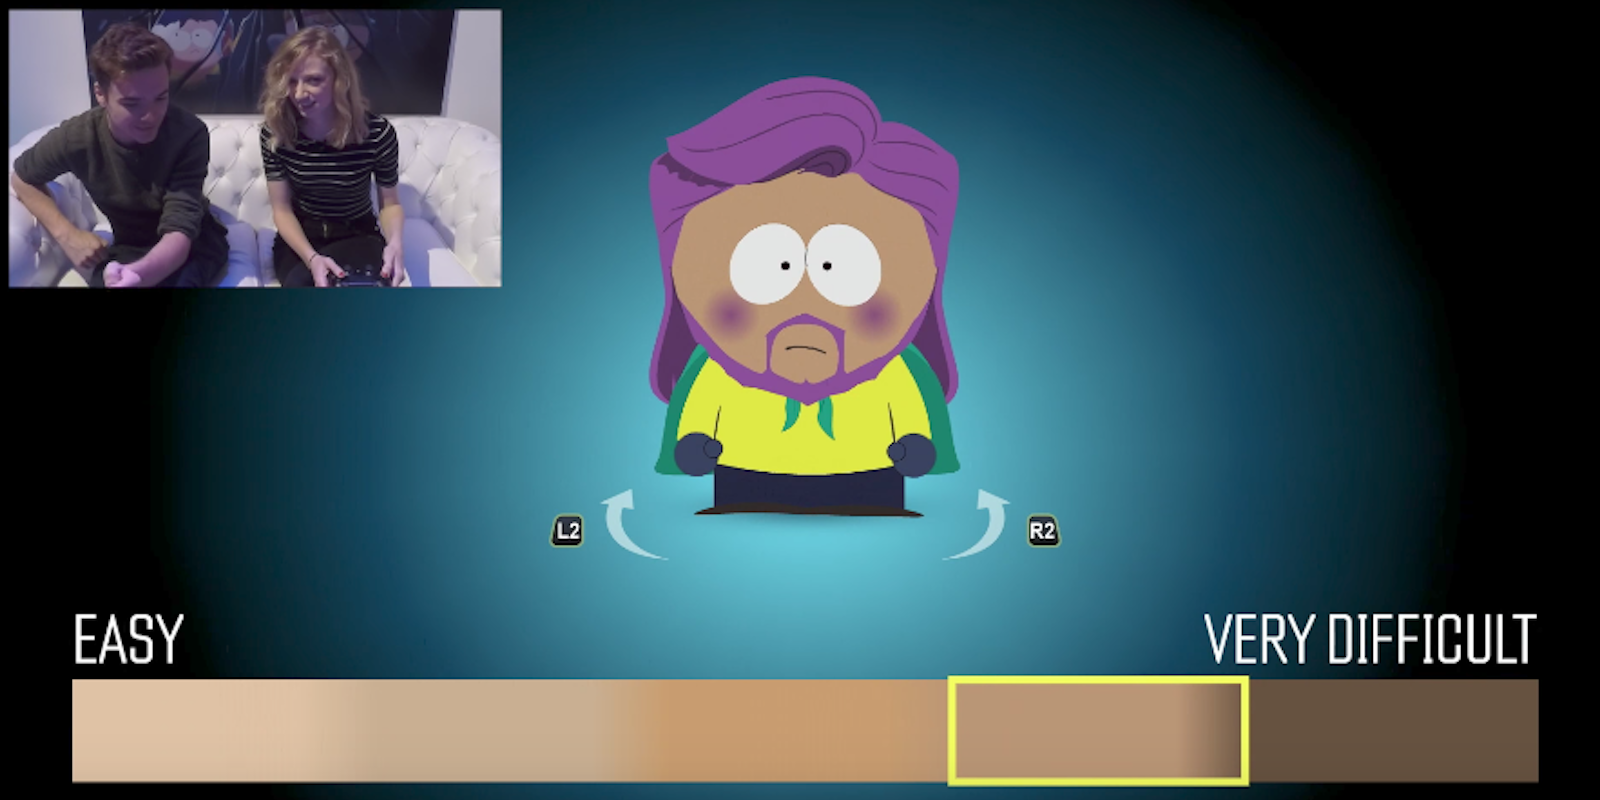 south park video game